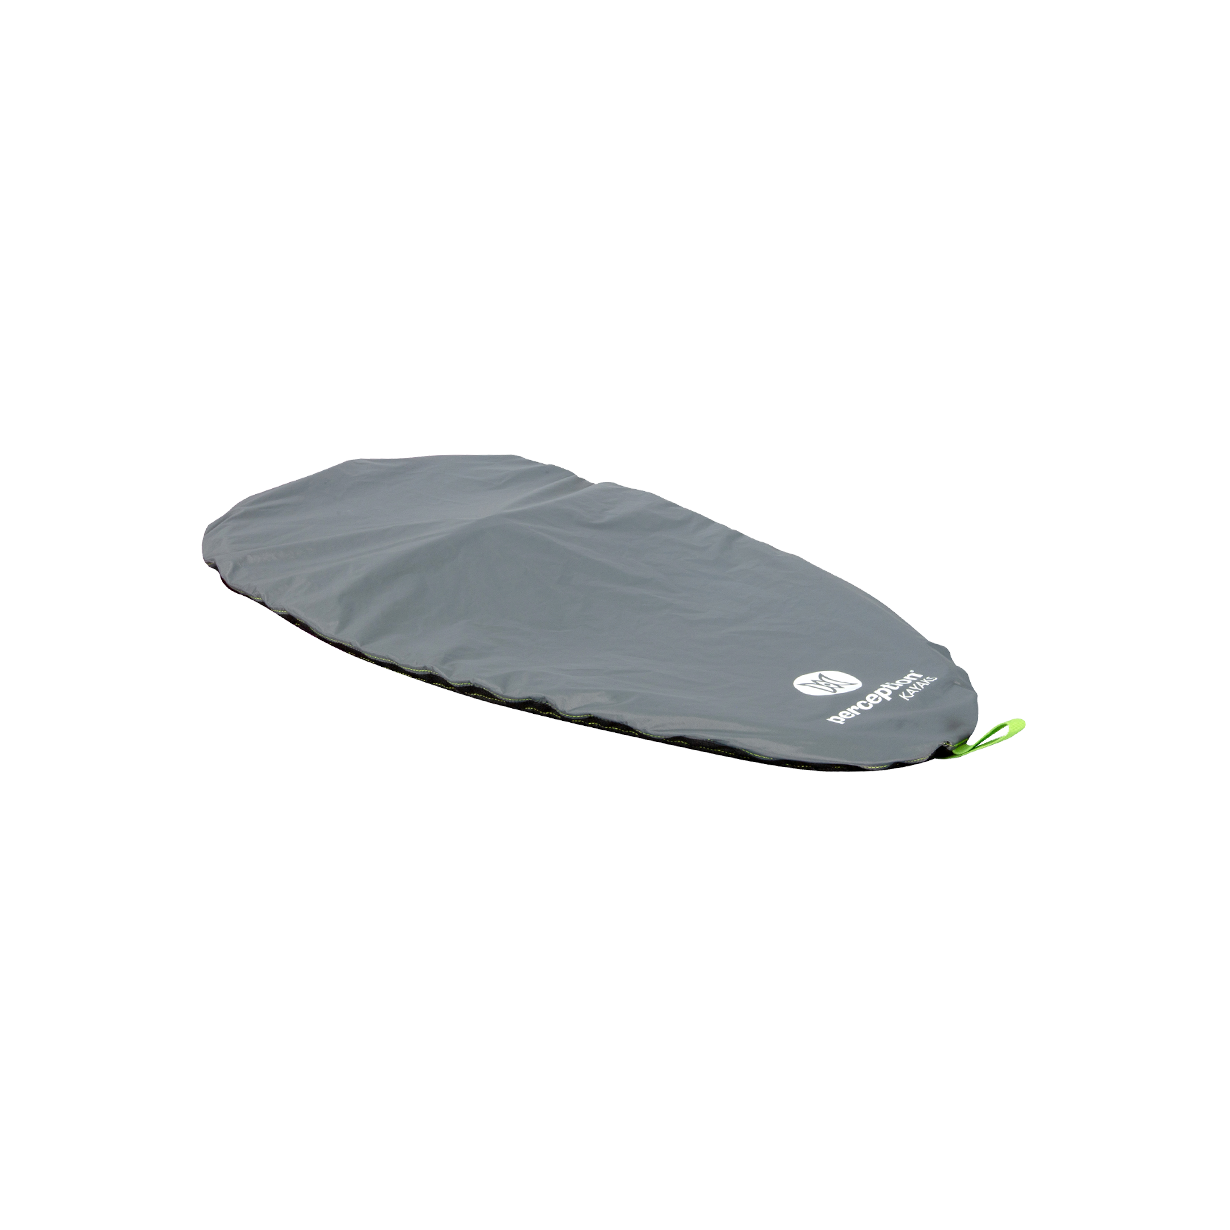 Featuring the TrueFit Cockpit Cover rec spray skirt, touring spray skirt manufactured by Perception shown here from one angle.